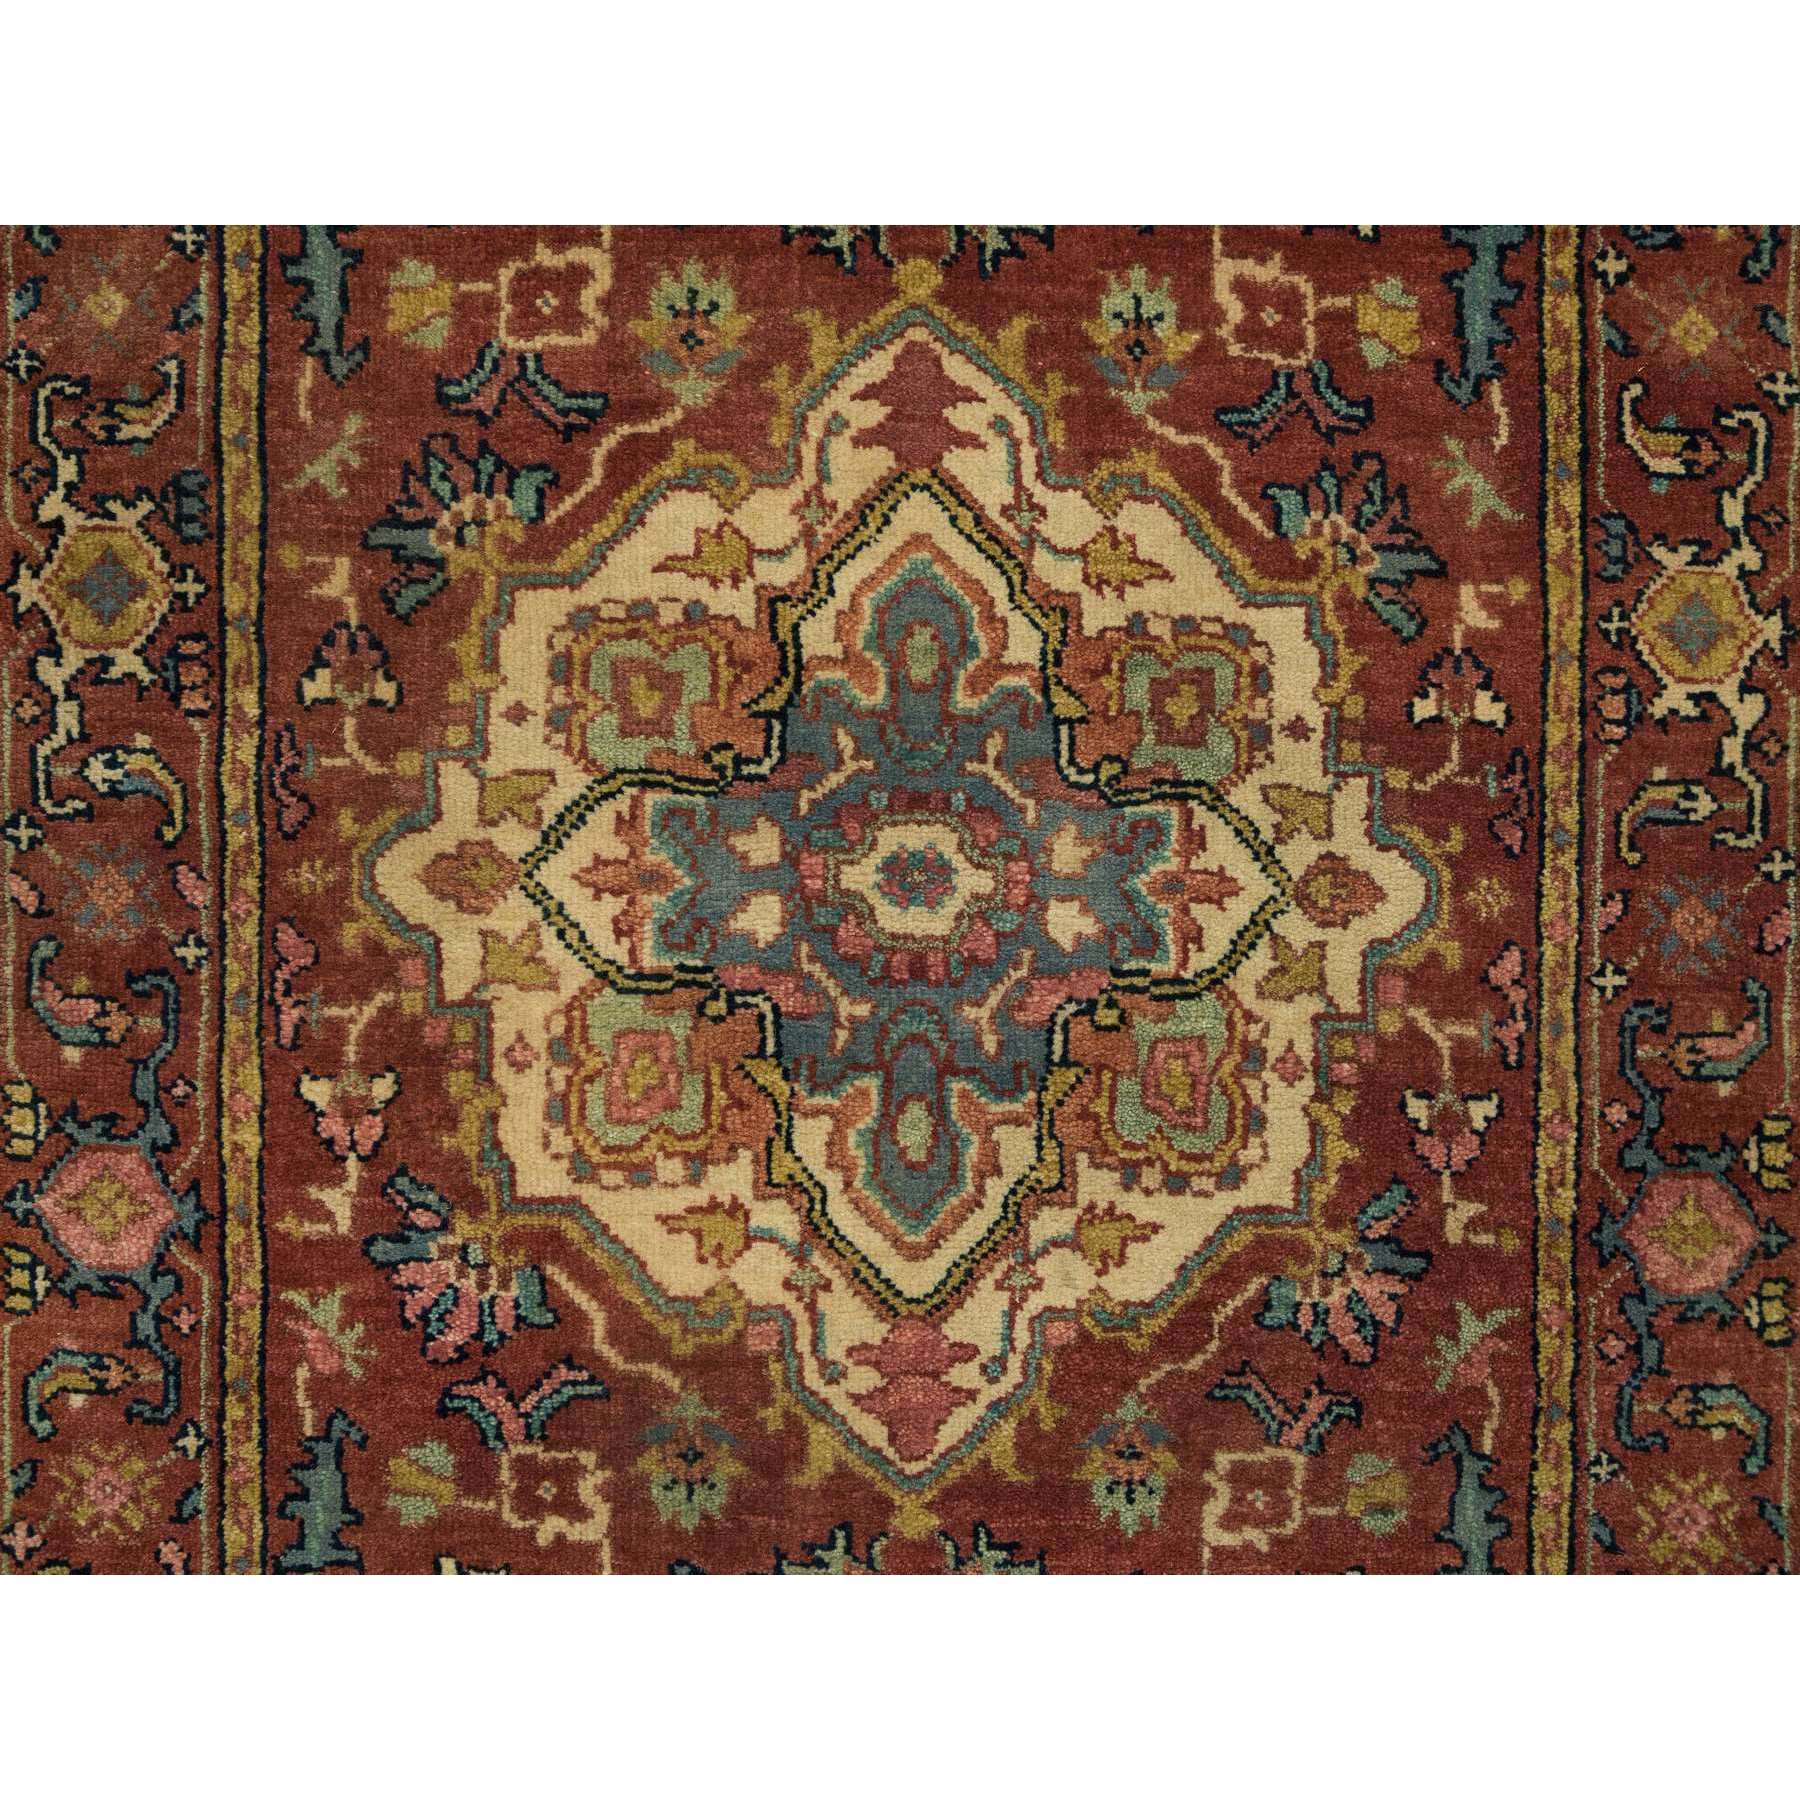 2'7"x16'2" Terracotta Red, Vegetable Dyes, Hand Woven, Soft Wool, Antiqued Fine Heriz Re-Creation, Densely Woven, XL Runner Oriental Rug 